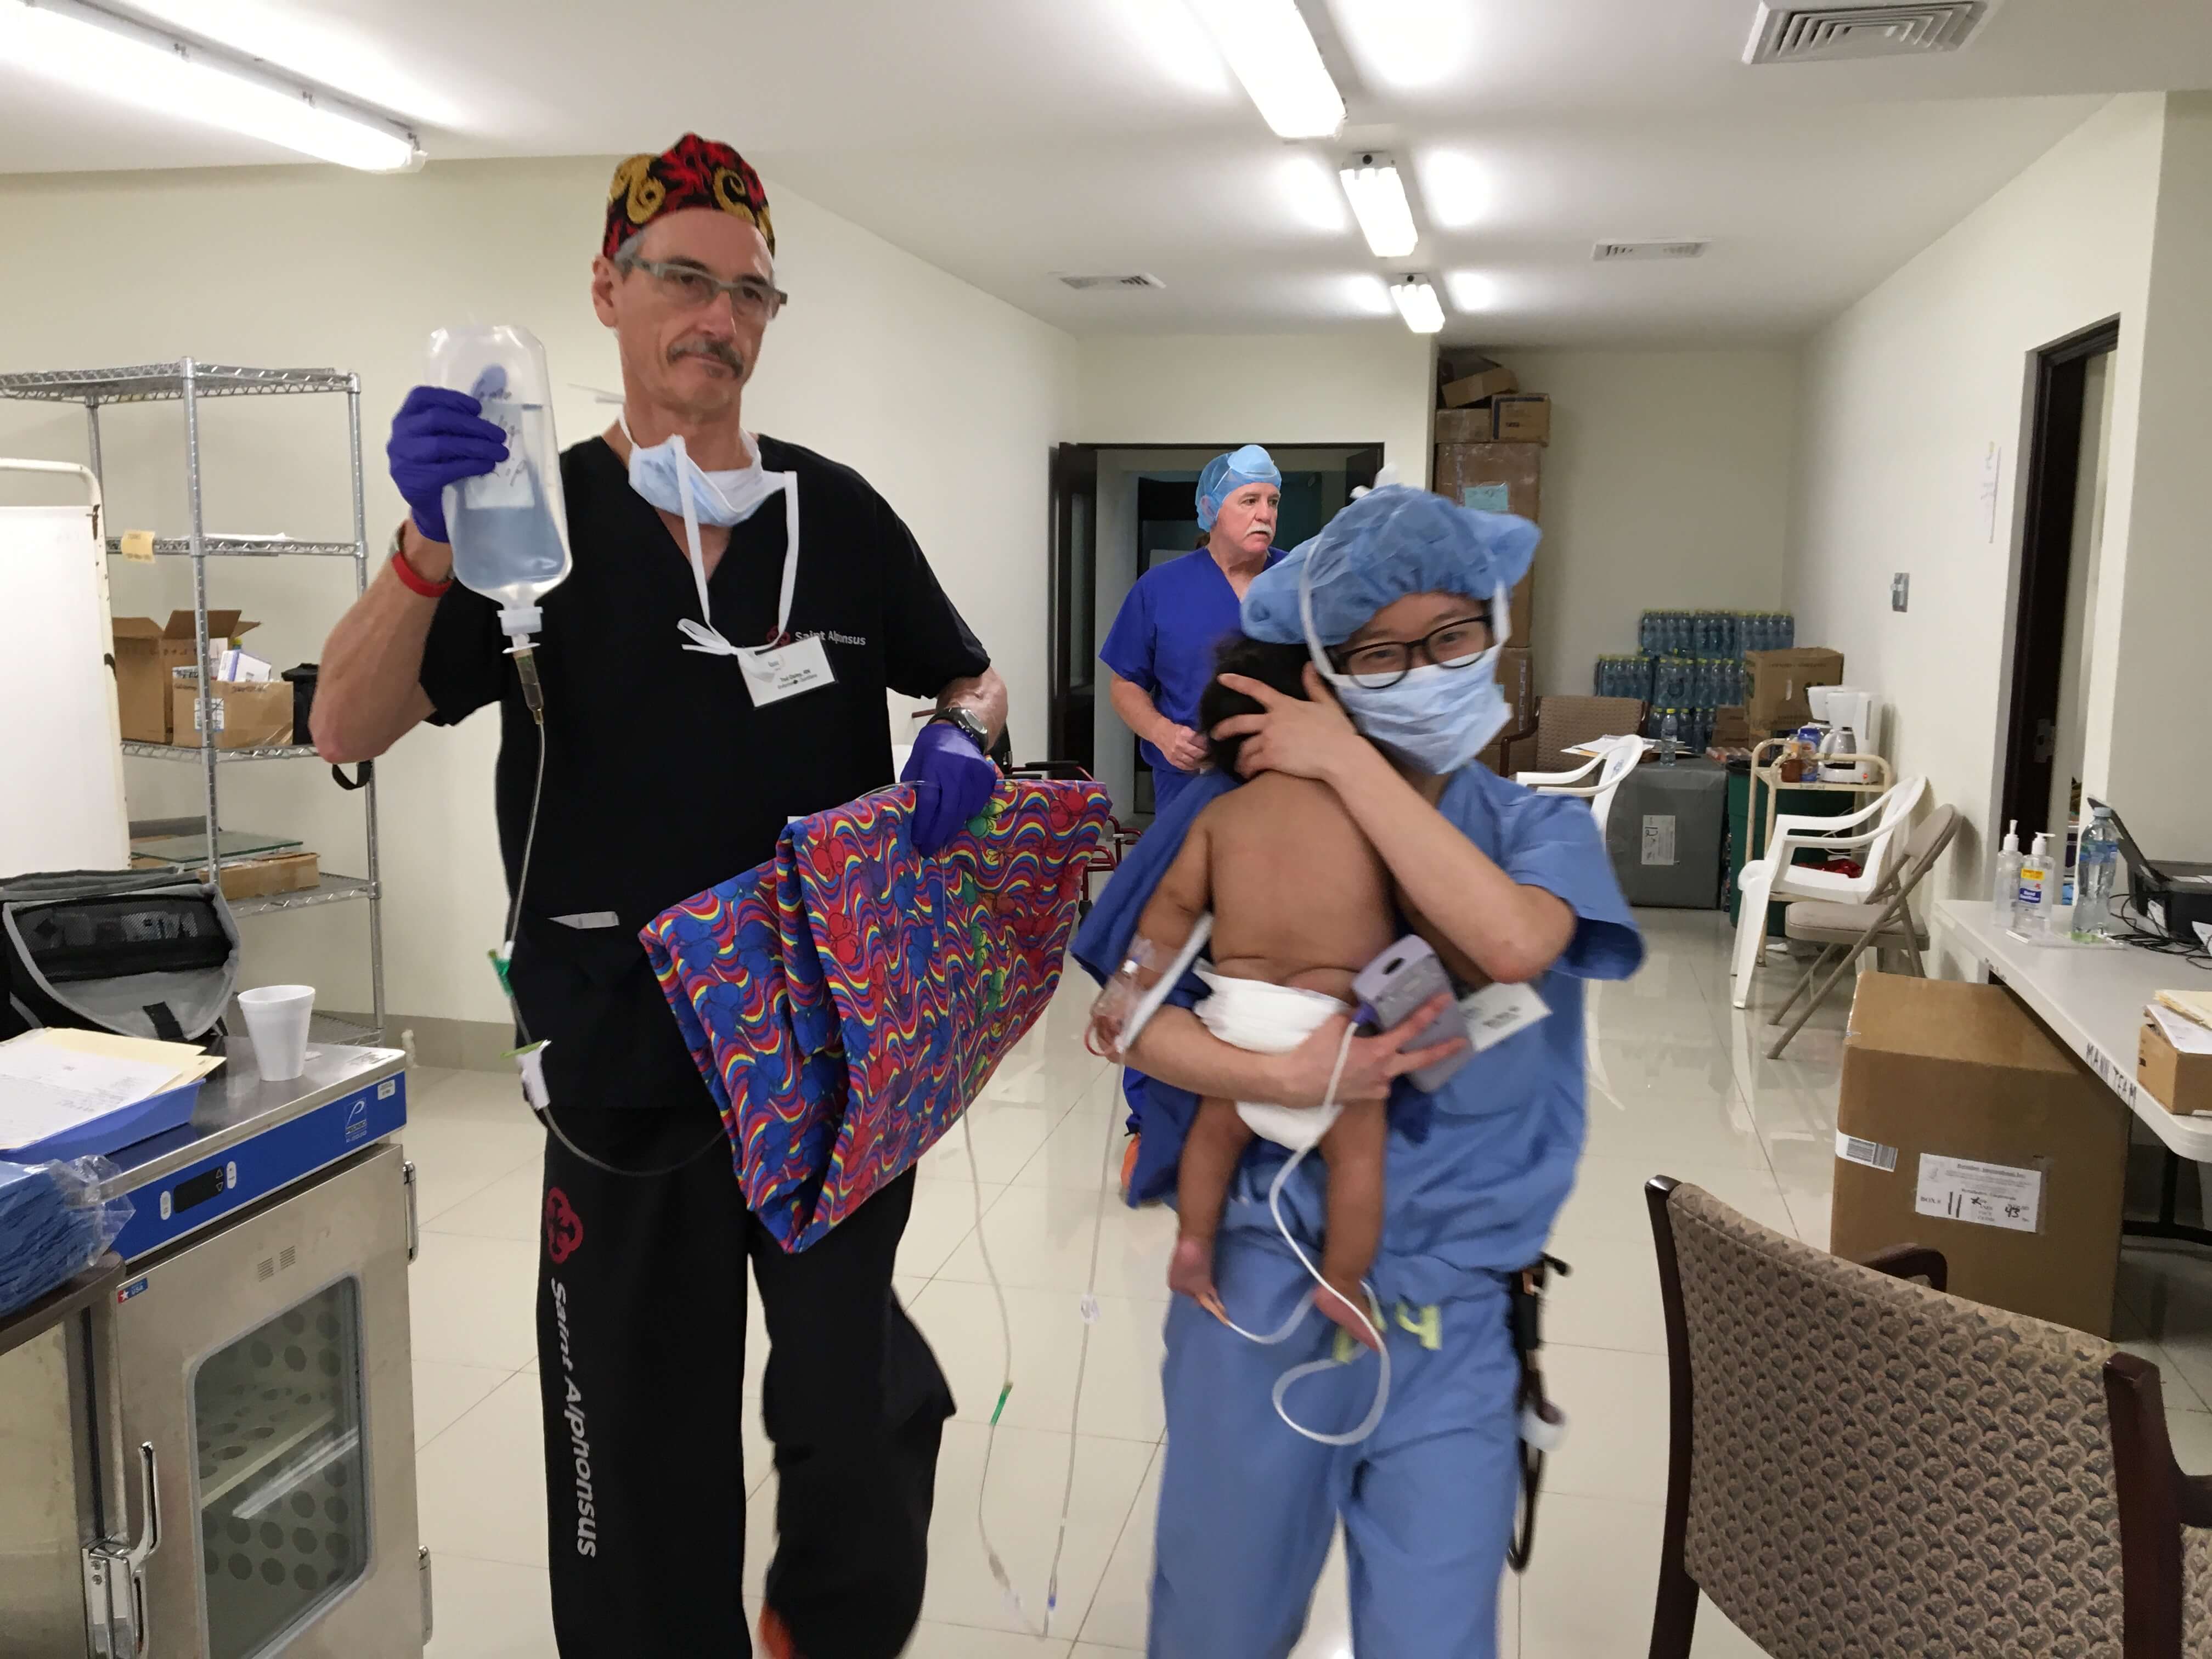 Nurse Ted Daley and anesthesiologist Mary Rhee bring a young patient from the OR to the recovery room.